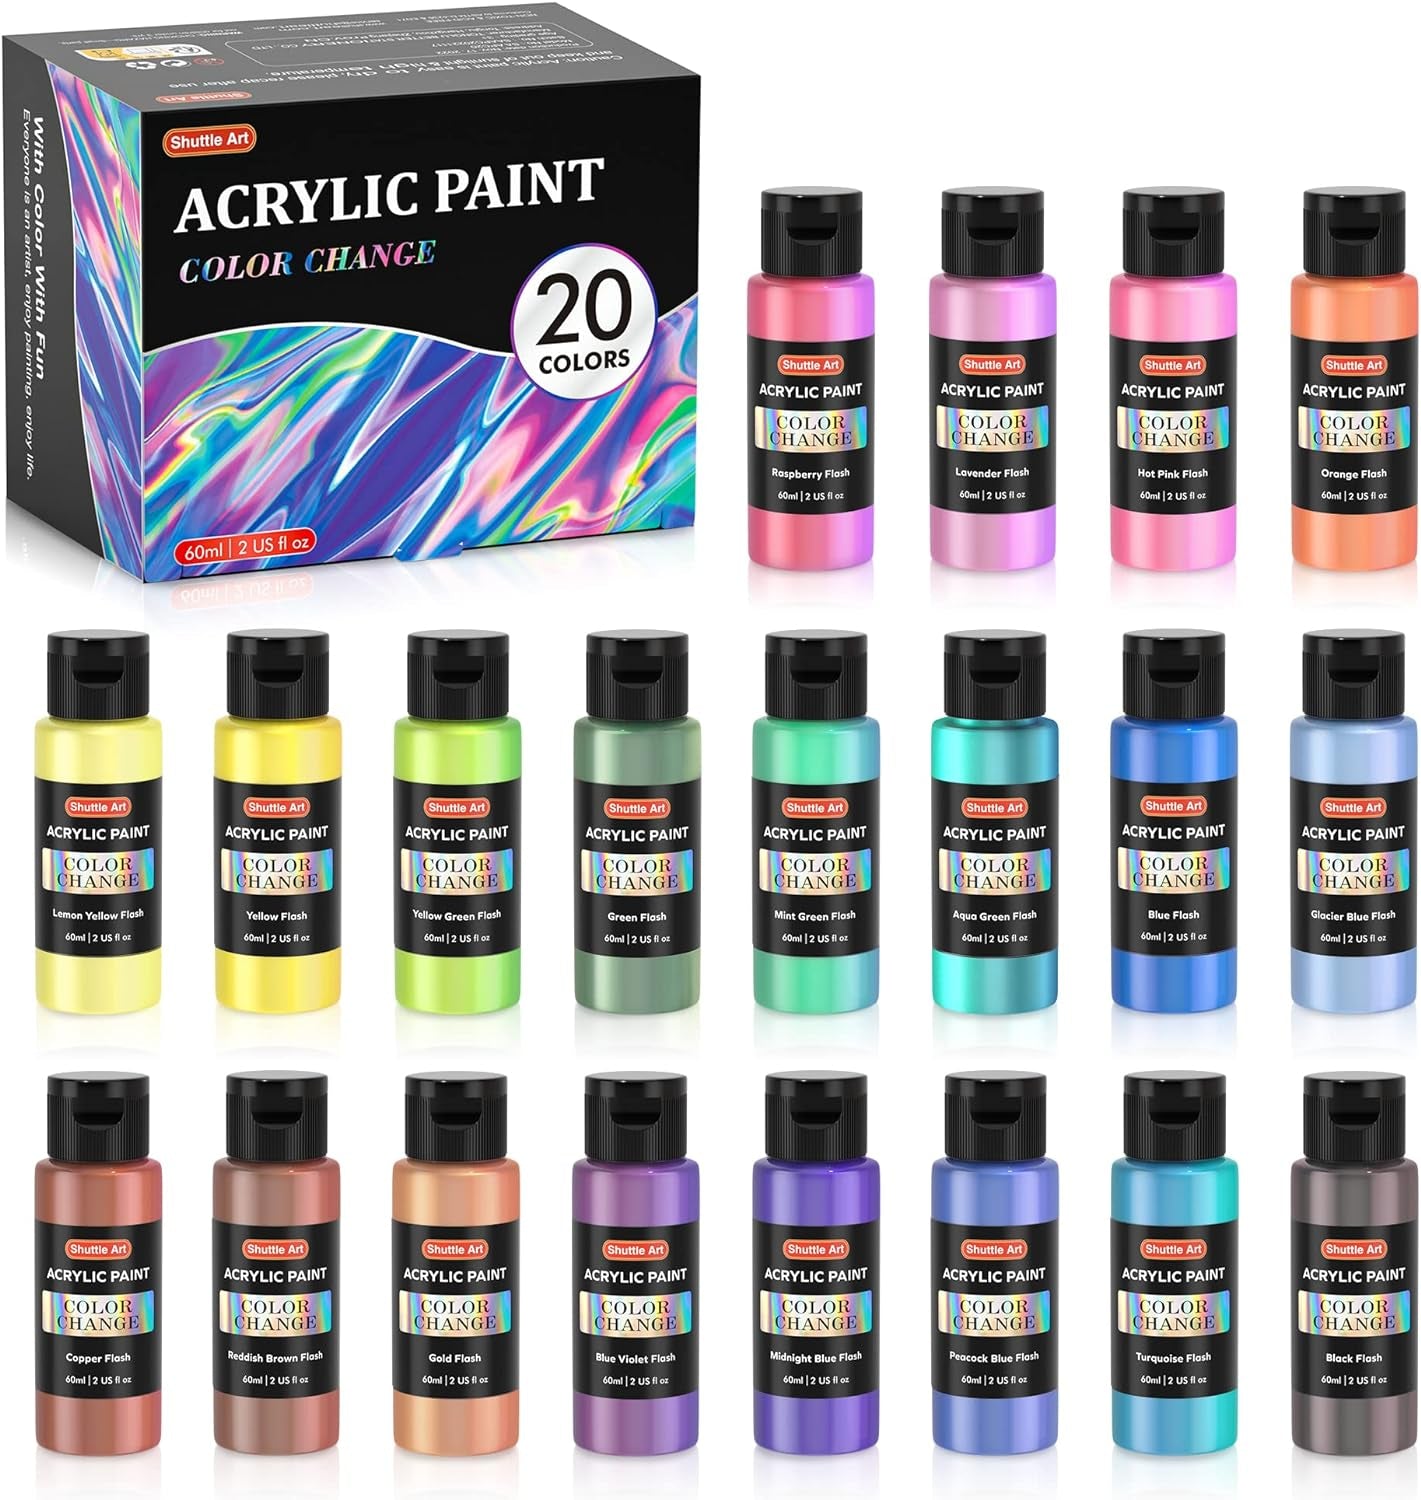 54 Colors Acrylic Paint,  Acrylic Paint Set with 12 Paint Brushes, 2Oz/60Ml Bottles, Rich Pigmented, Water Proof, Premium Paints for Artists, Beginners and Kids on Canvas Rocks Wood Ceramic